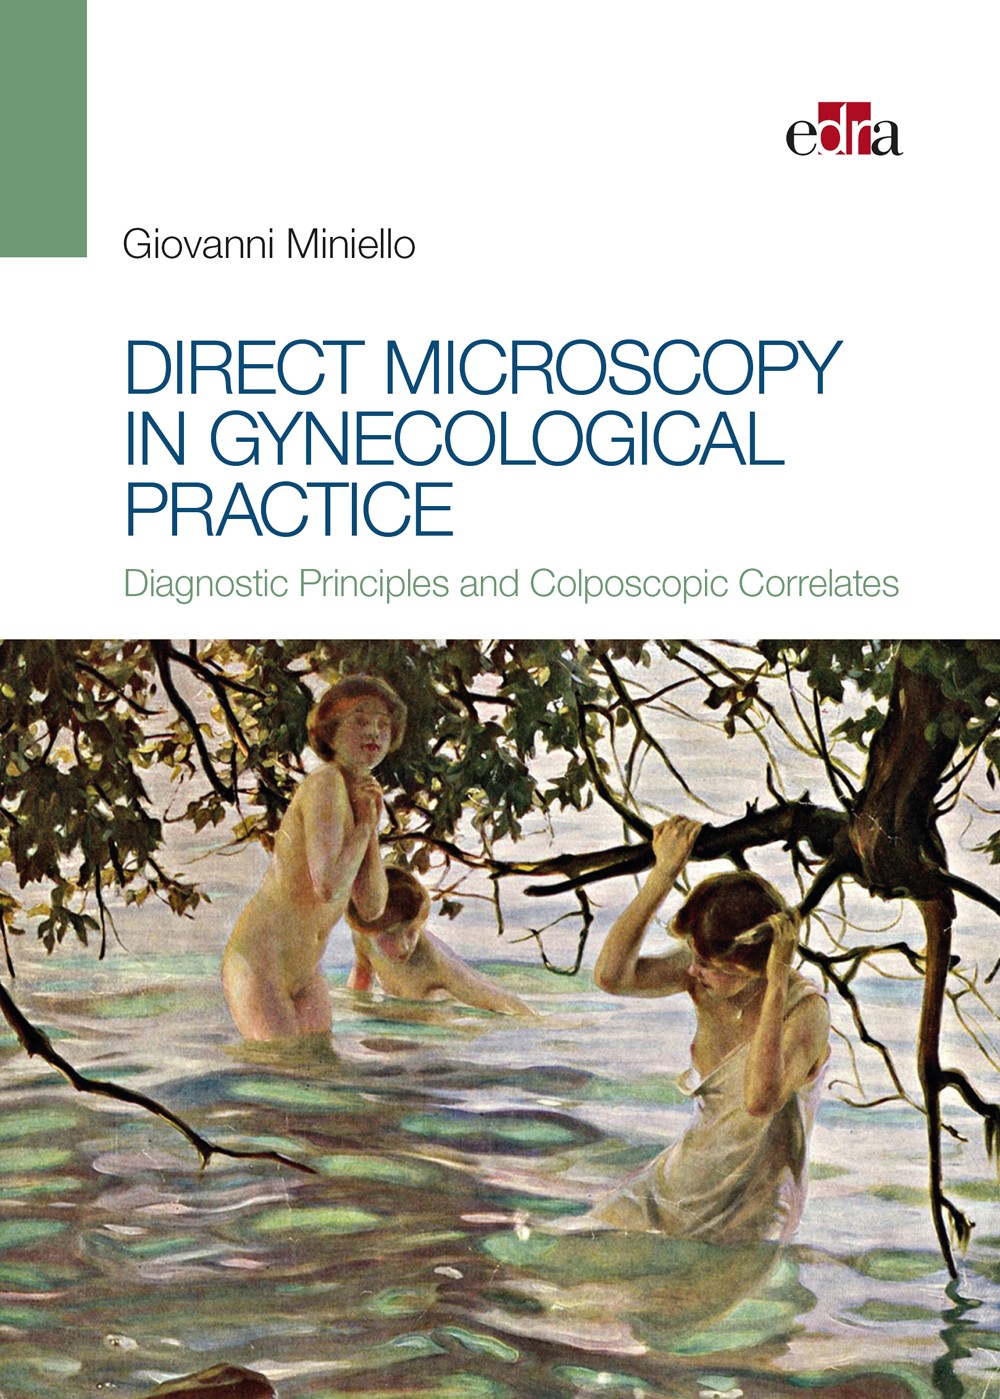 Direct microscopy in gynecological practice - Librerie.coop